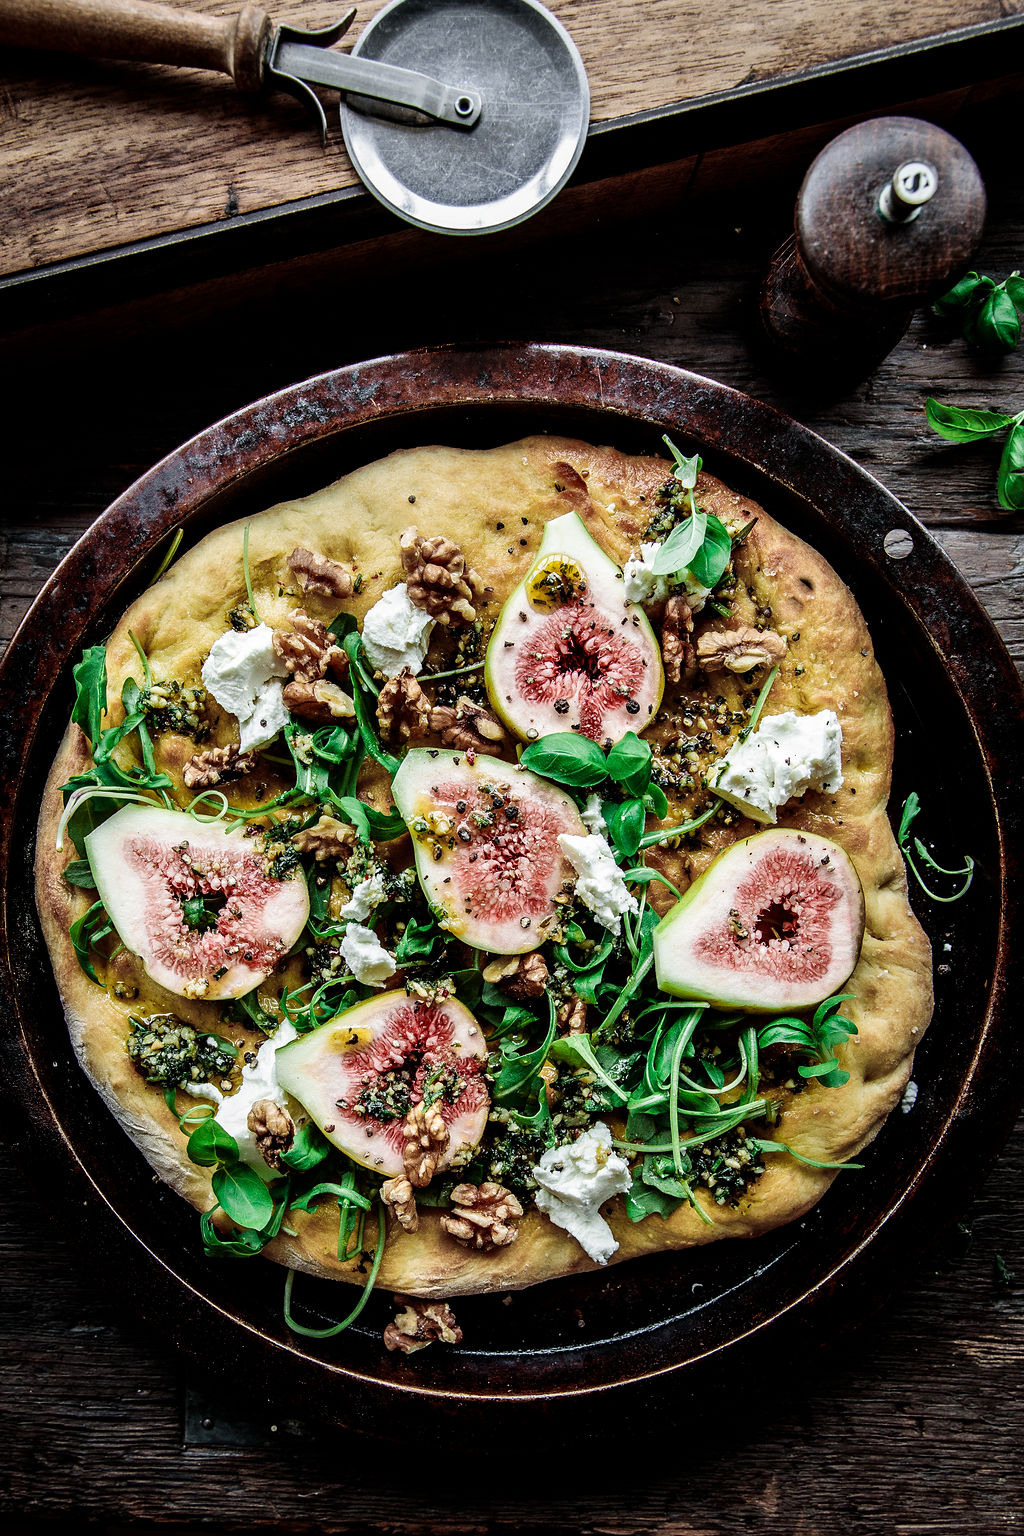 An image of a rustic home made pizza topped with walnuts, greens, and figs.